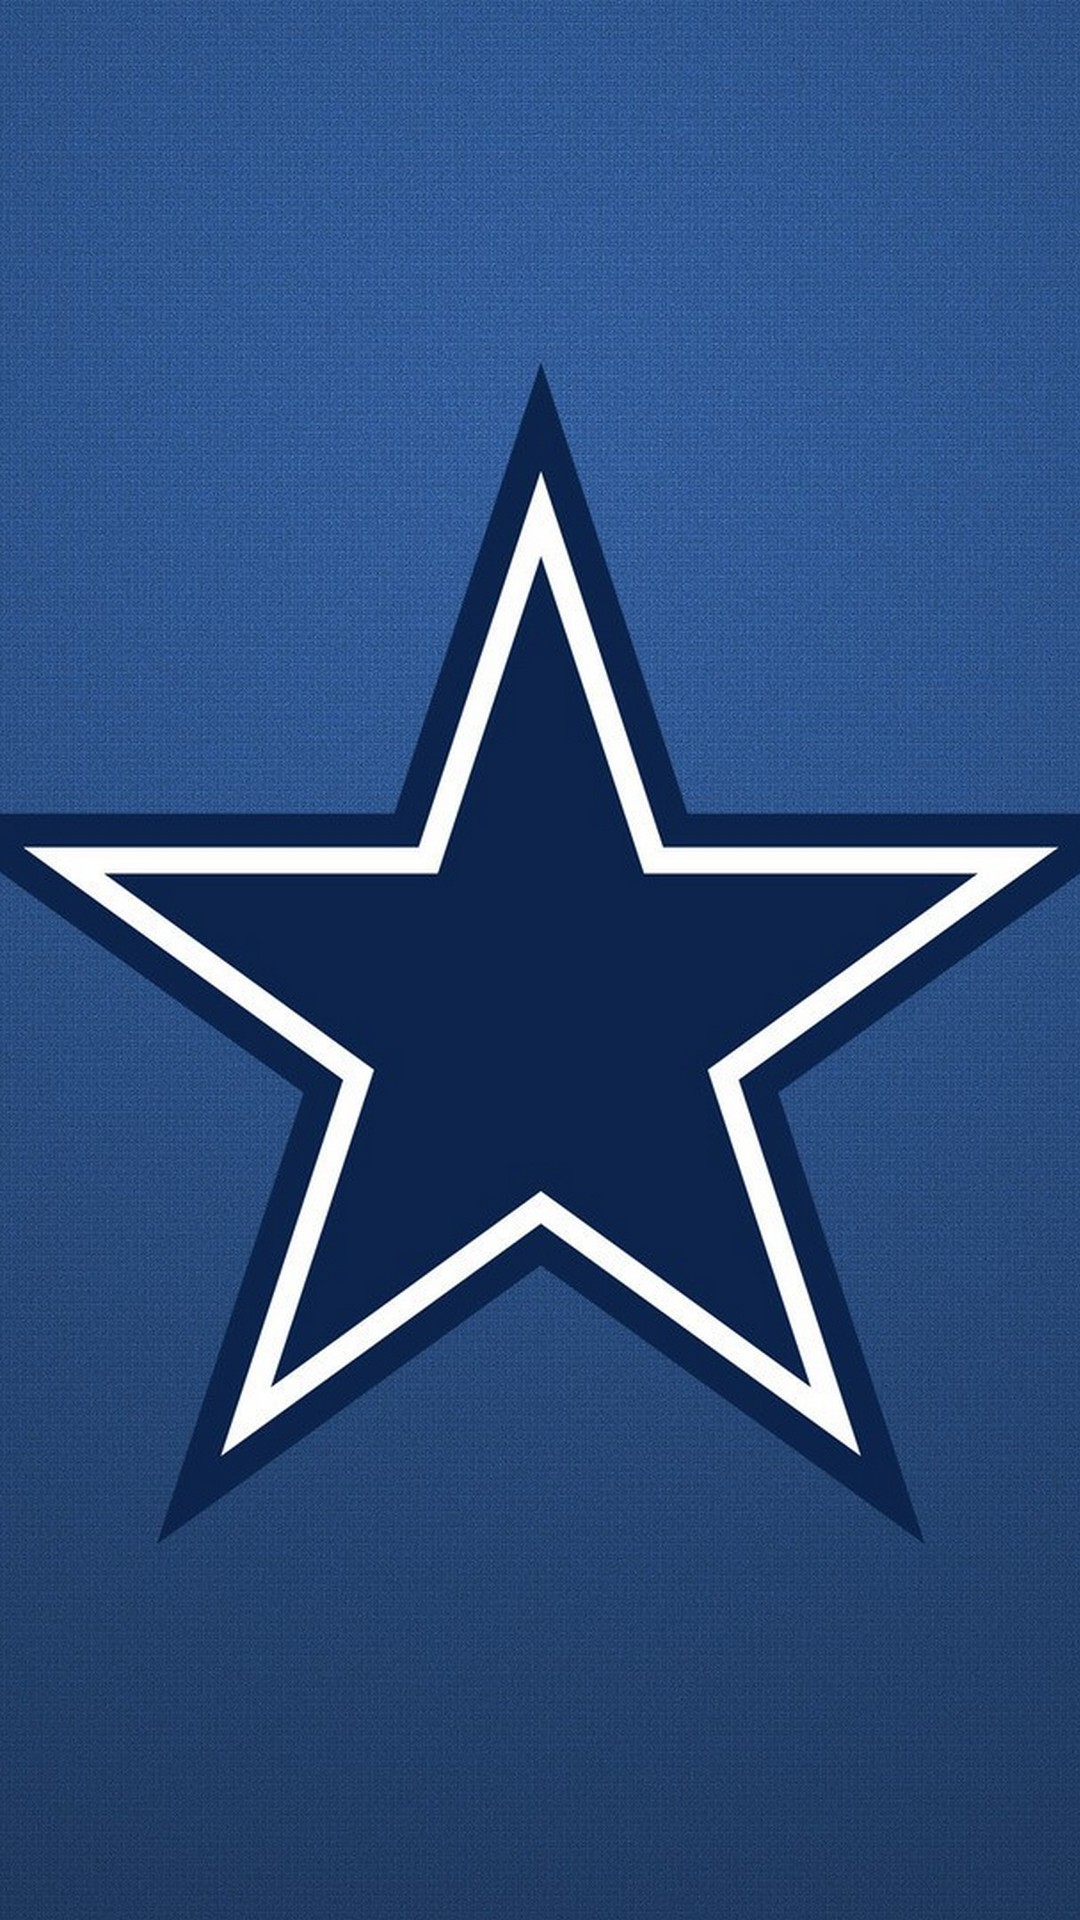 Screensaver iPhone Dallas Cowboys with high-resolution 1080x1920 pixel. Donwload and set as wallpaper for your iPhone X, iPhone XS home screen backgrounds, XS Max, XR, iPhone8 lock screen wallpaper, iPhone 7, 6, SE and other mobile devices